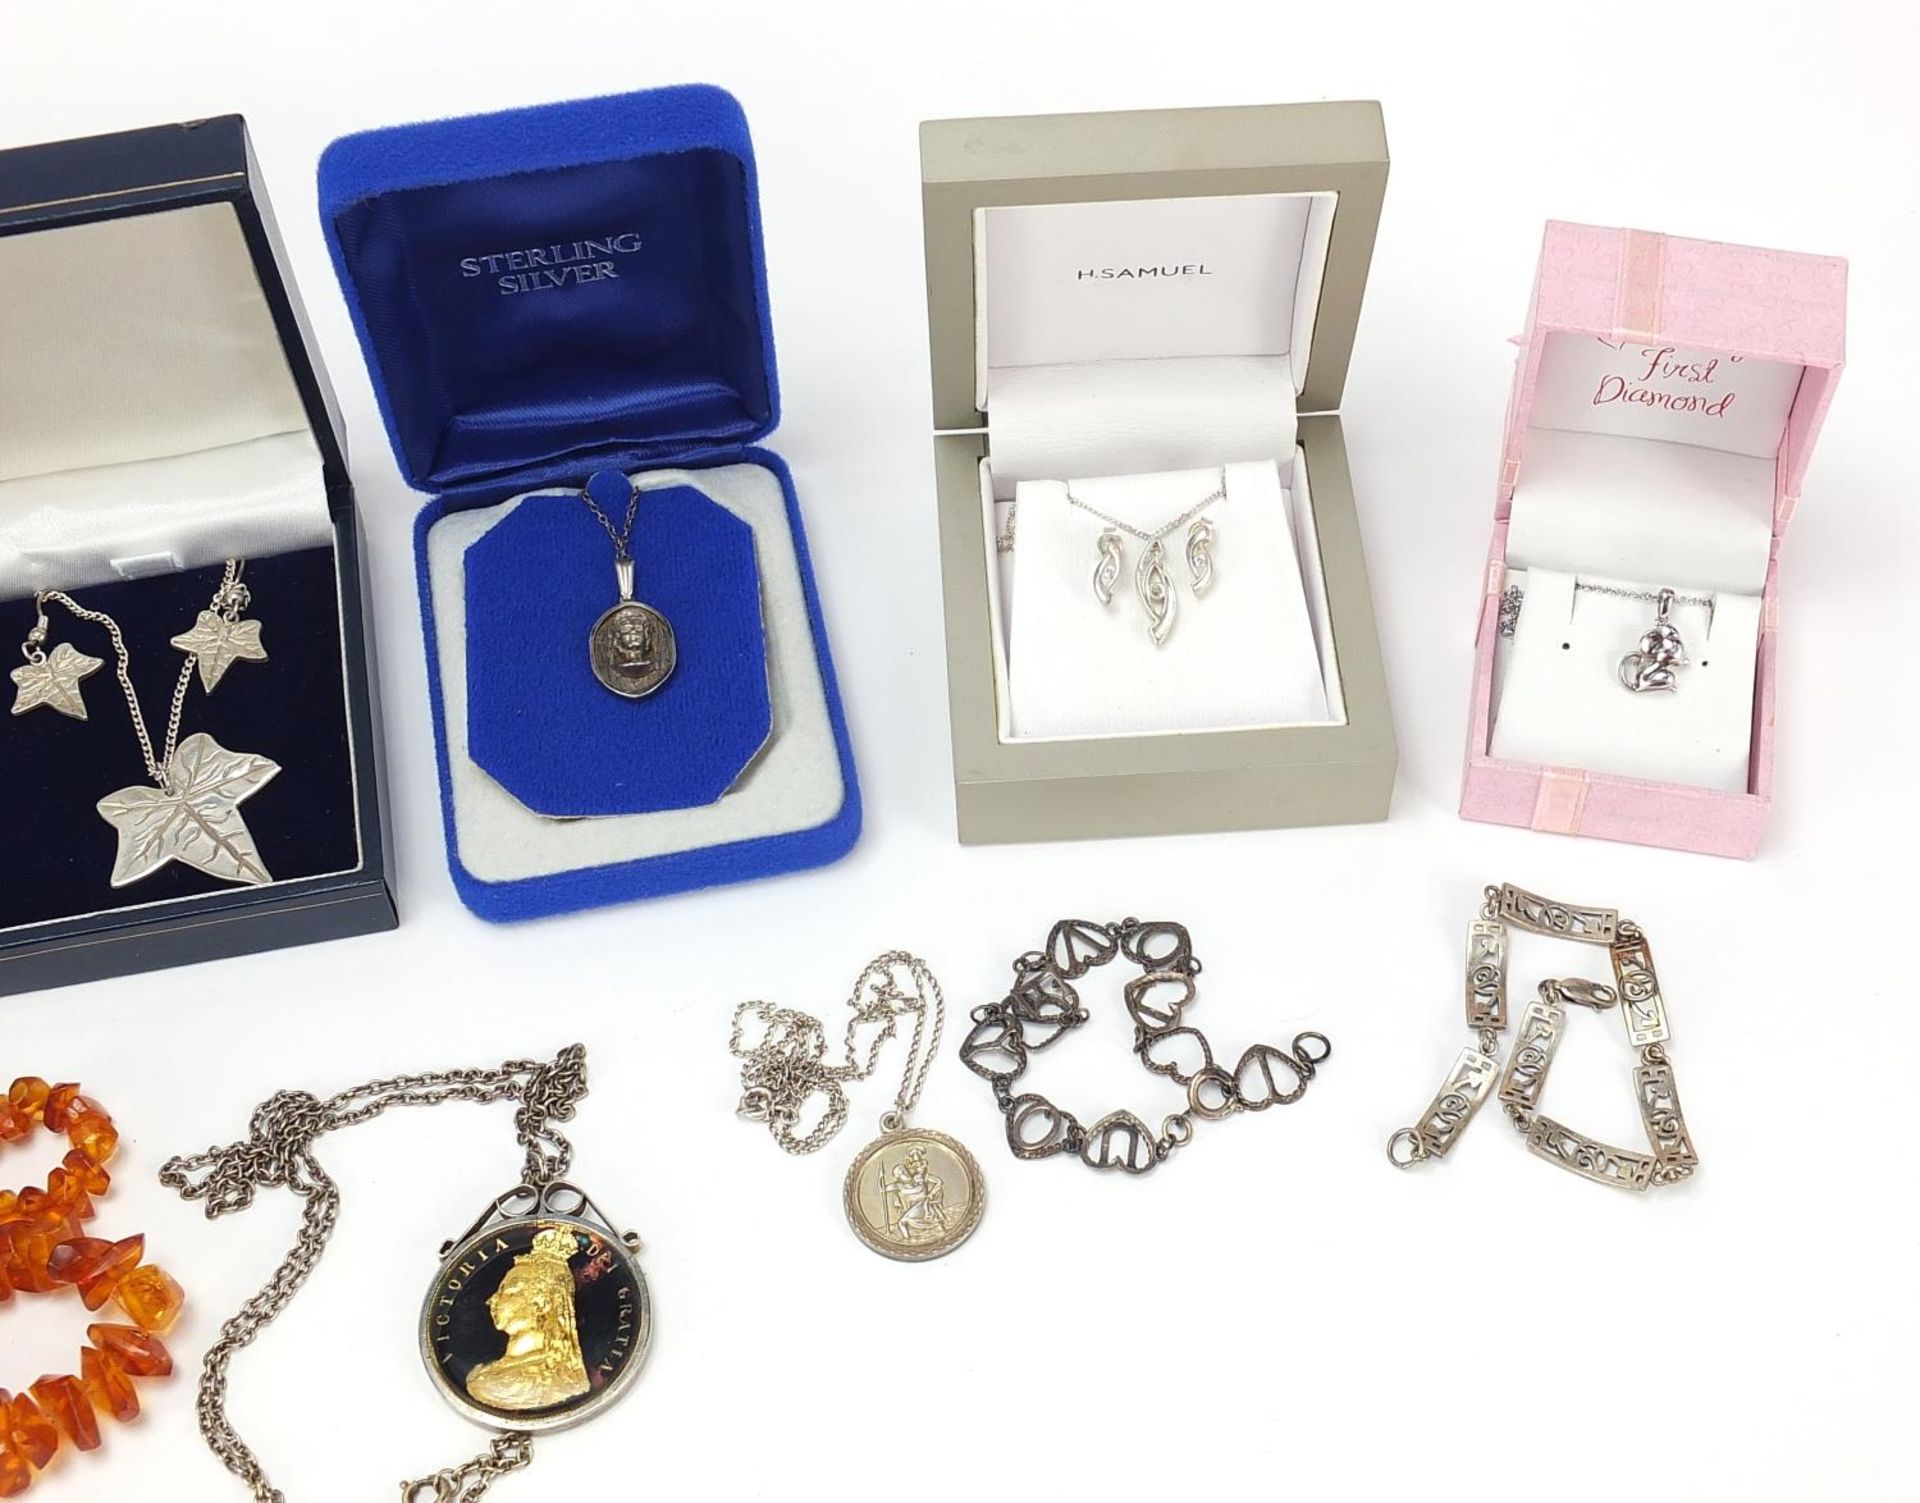 Silver jewellery comprising eleven pendants on necklaces, two pairs of earrings, two bracelets, - Image 4 of 5